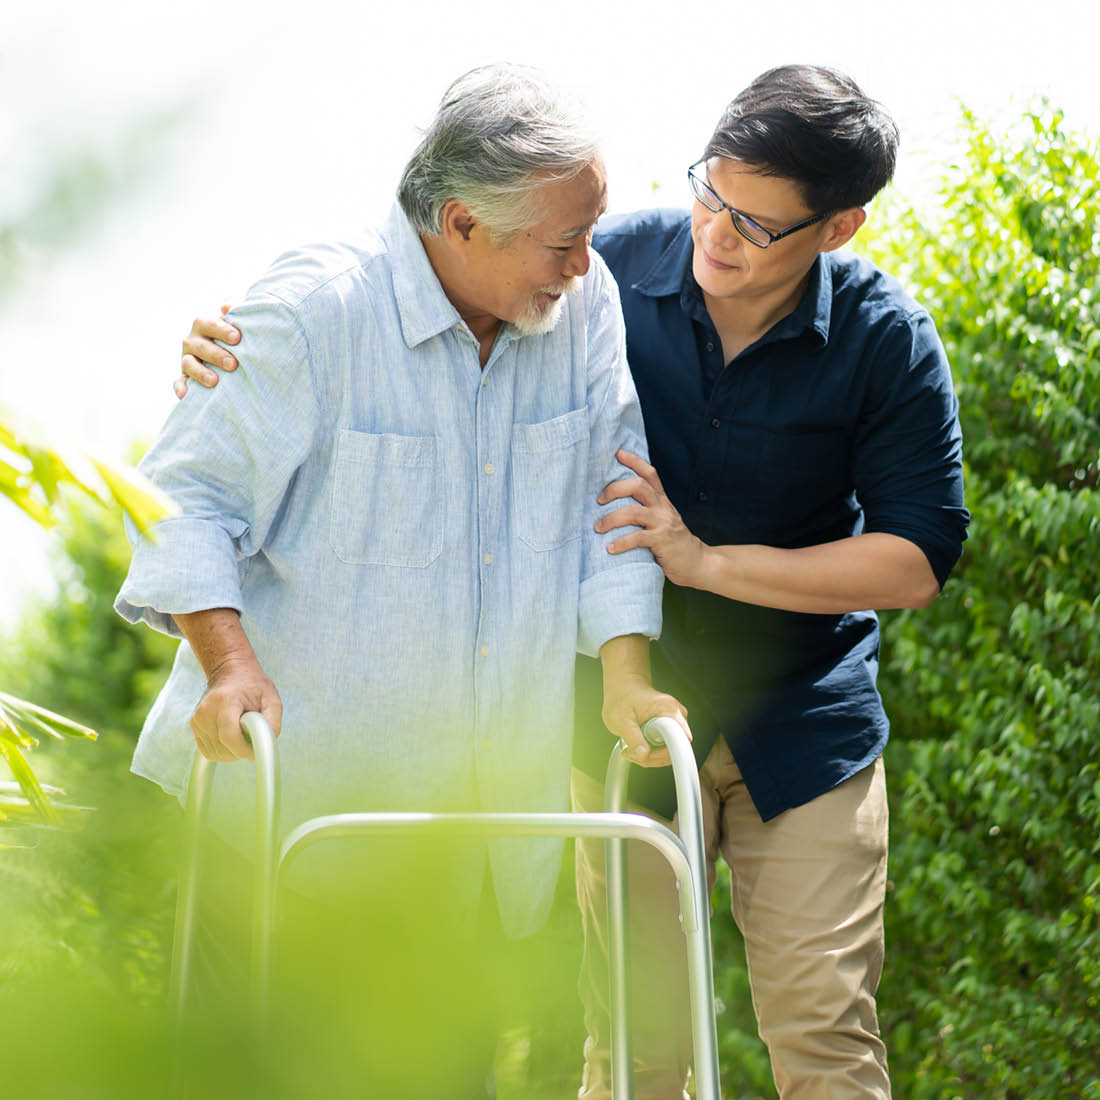 Falls prevention assessments and information